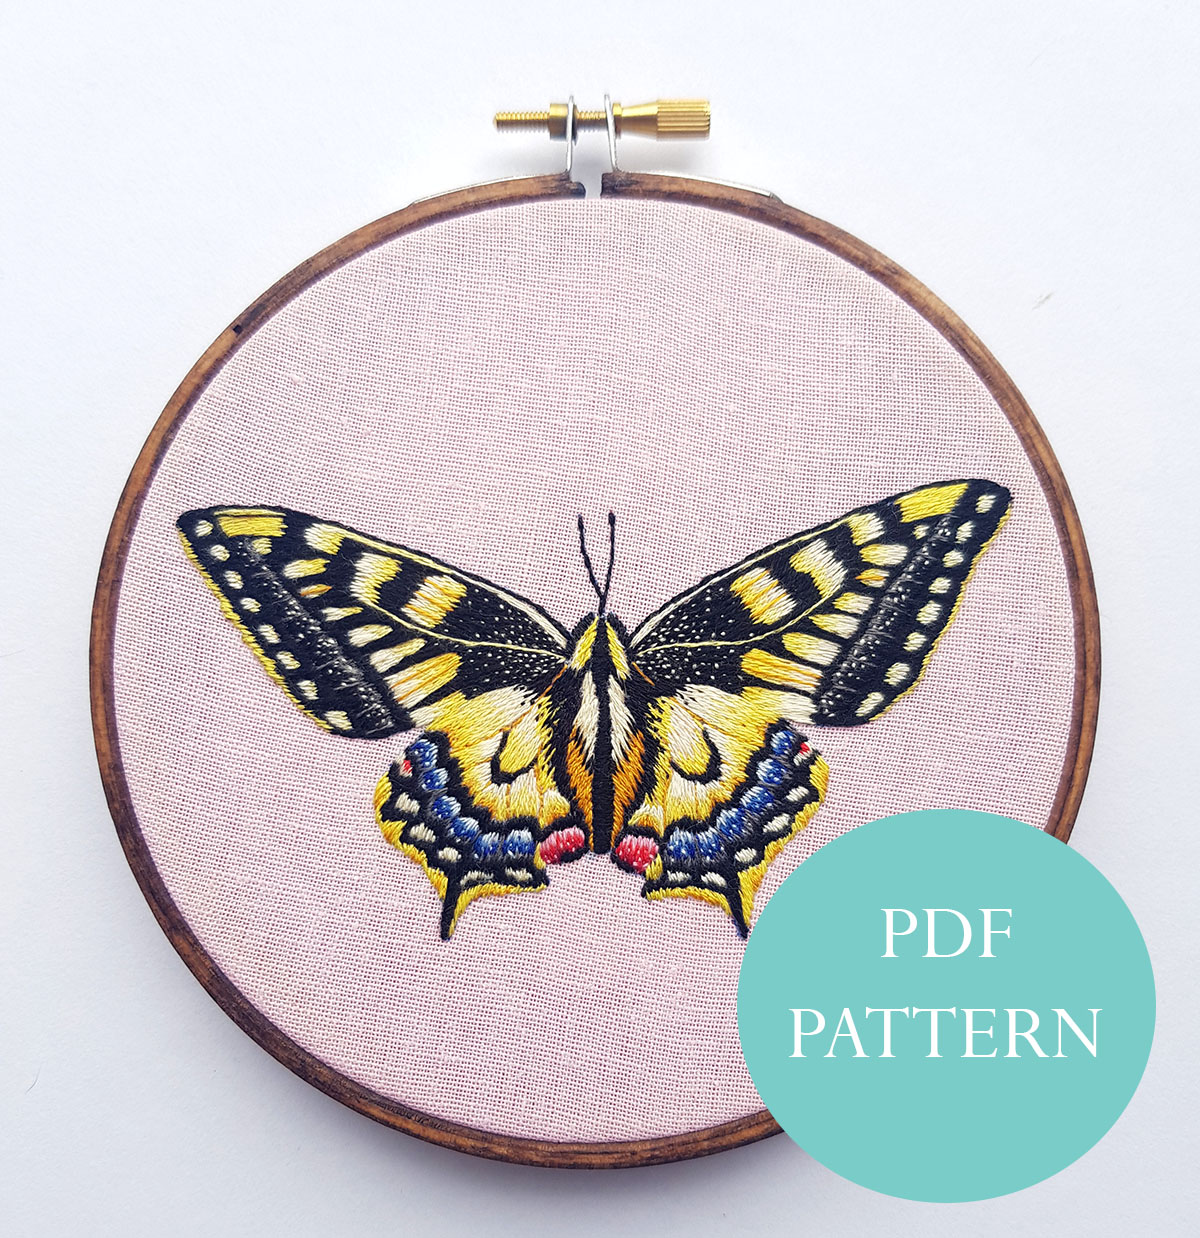 Yellow Butterfly, Embroidery Pattern Tutorial, PDF Digital Download, Hand Embroidery, Butterfly https://www.etsy.com/uk/listing/697183732/yellow-butterfly-pdf-digital-instant?ref=shop_home_active_4 